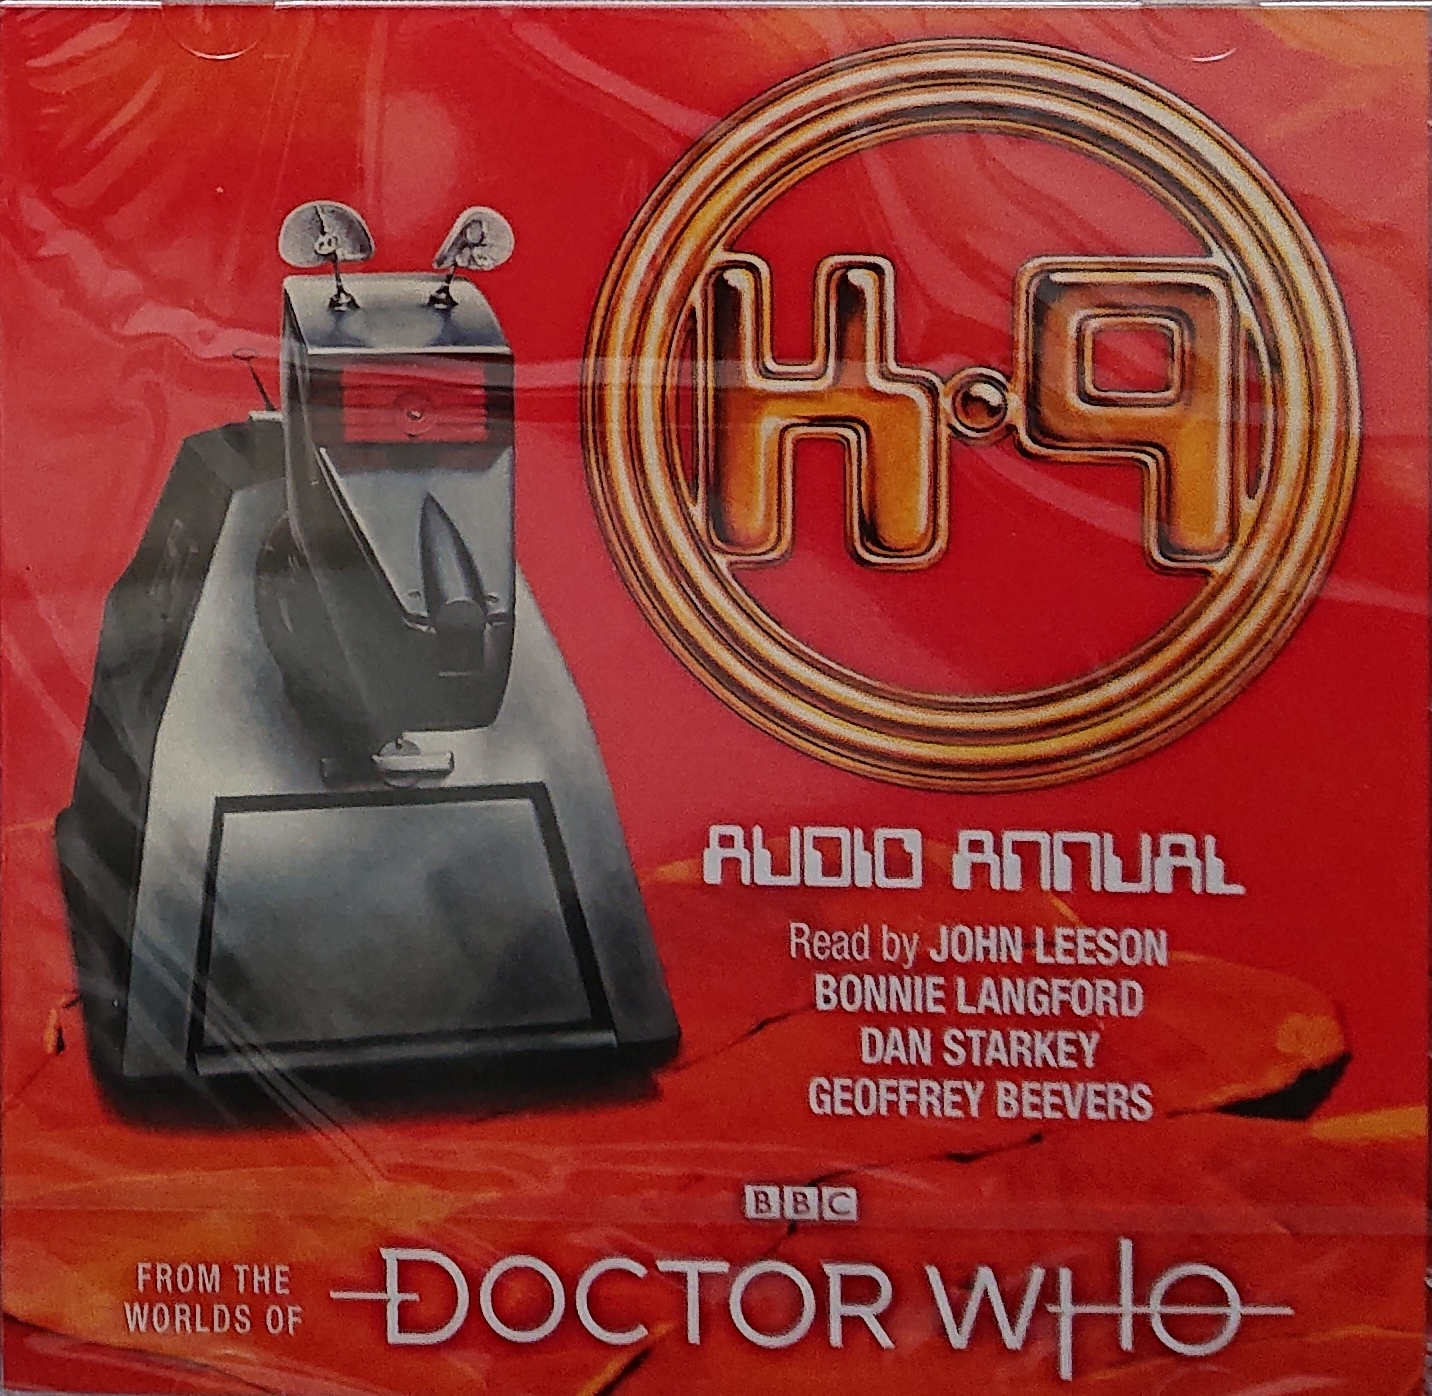 Picture of Doctor Who - Audio annual K-9 by artist Various from the BBC cds - Records and Tapes library